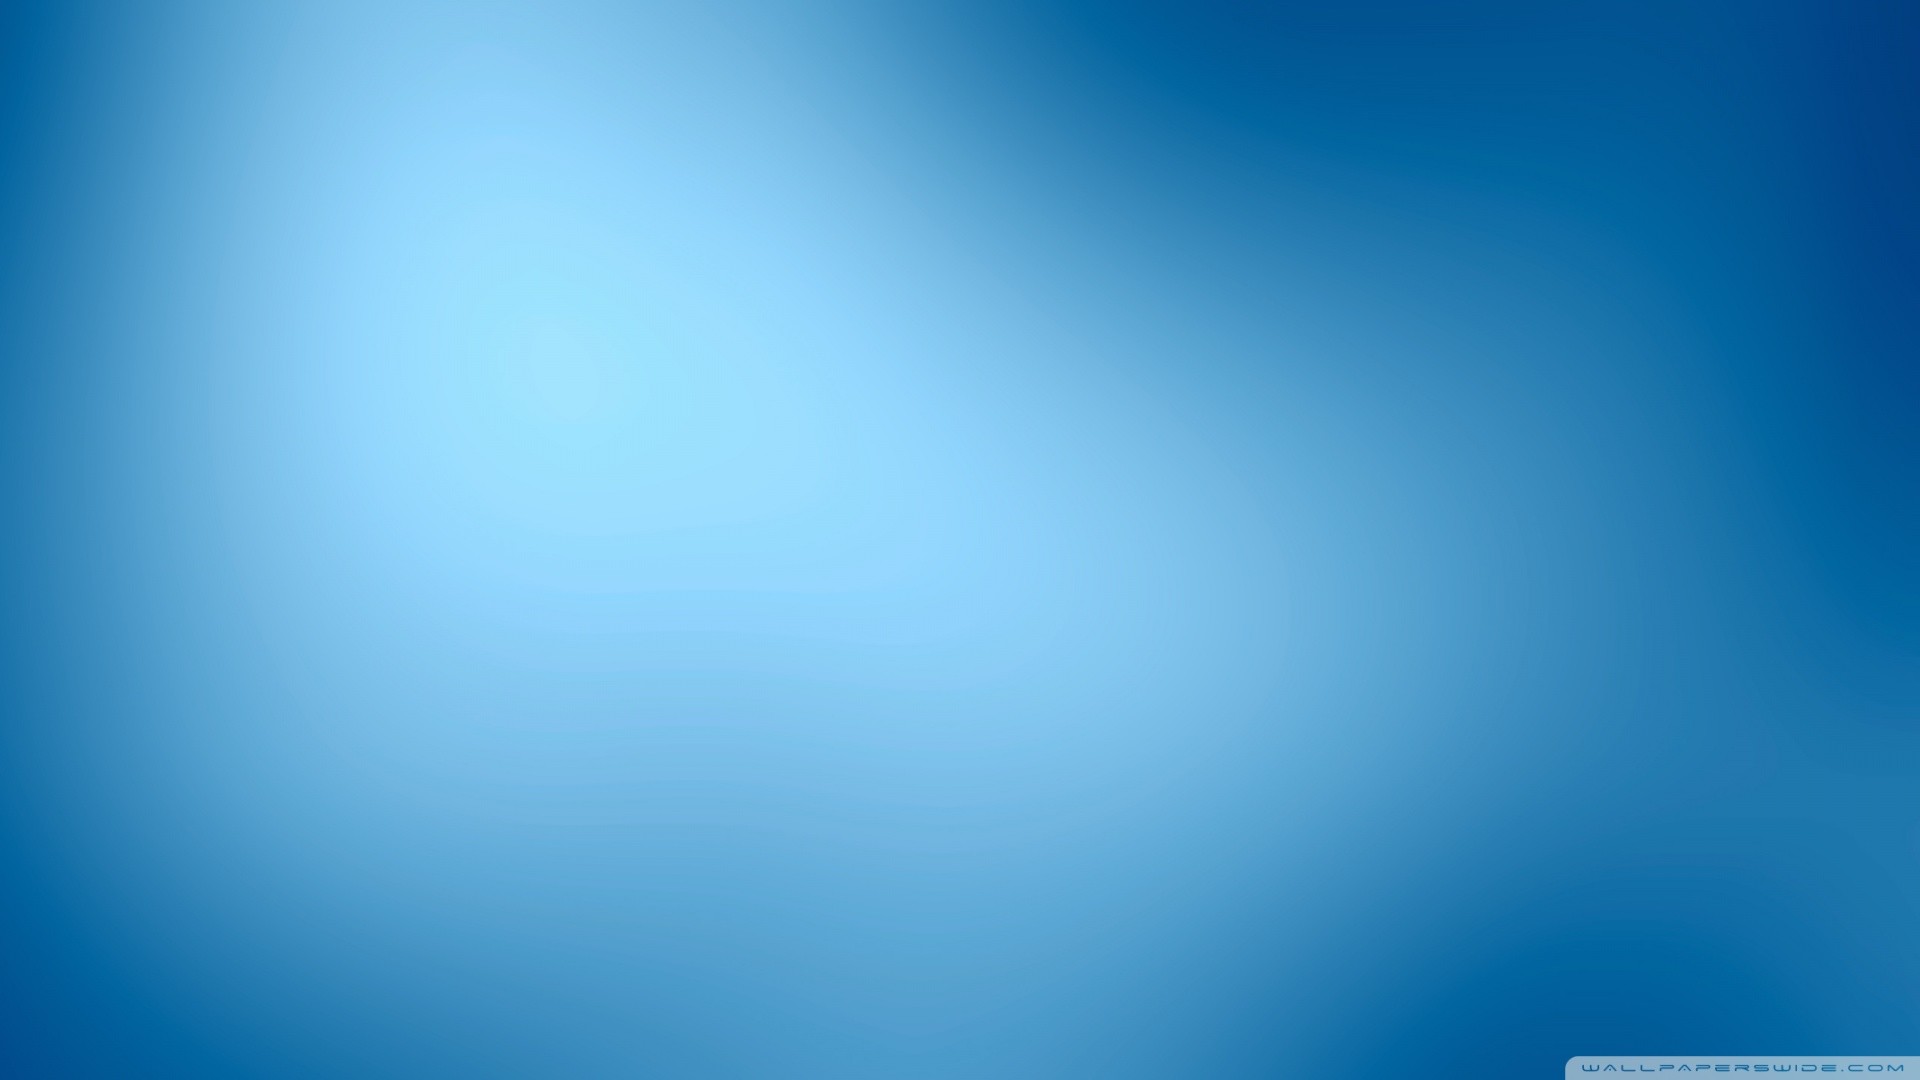 1920x1080 Sky blue background hd free stock photos download (26,369 Free ...  Wallpaper's ...